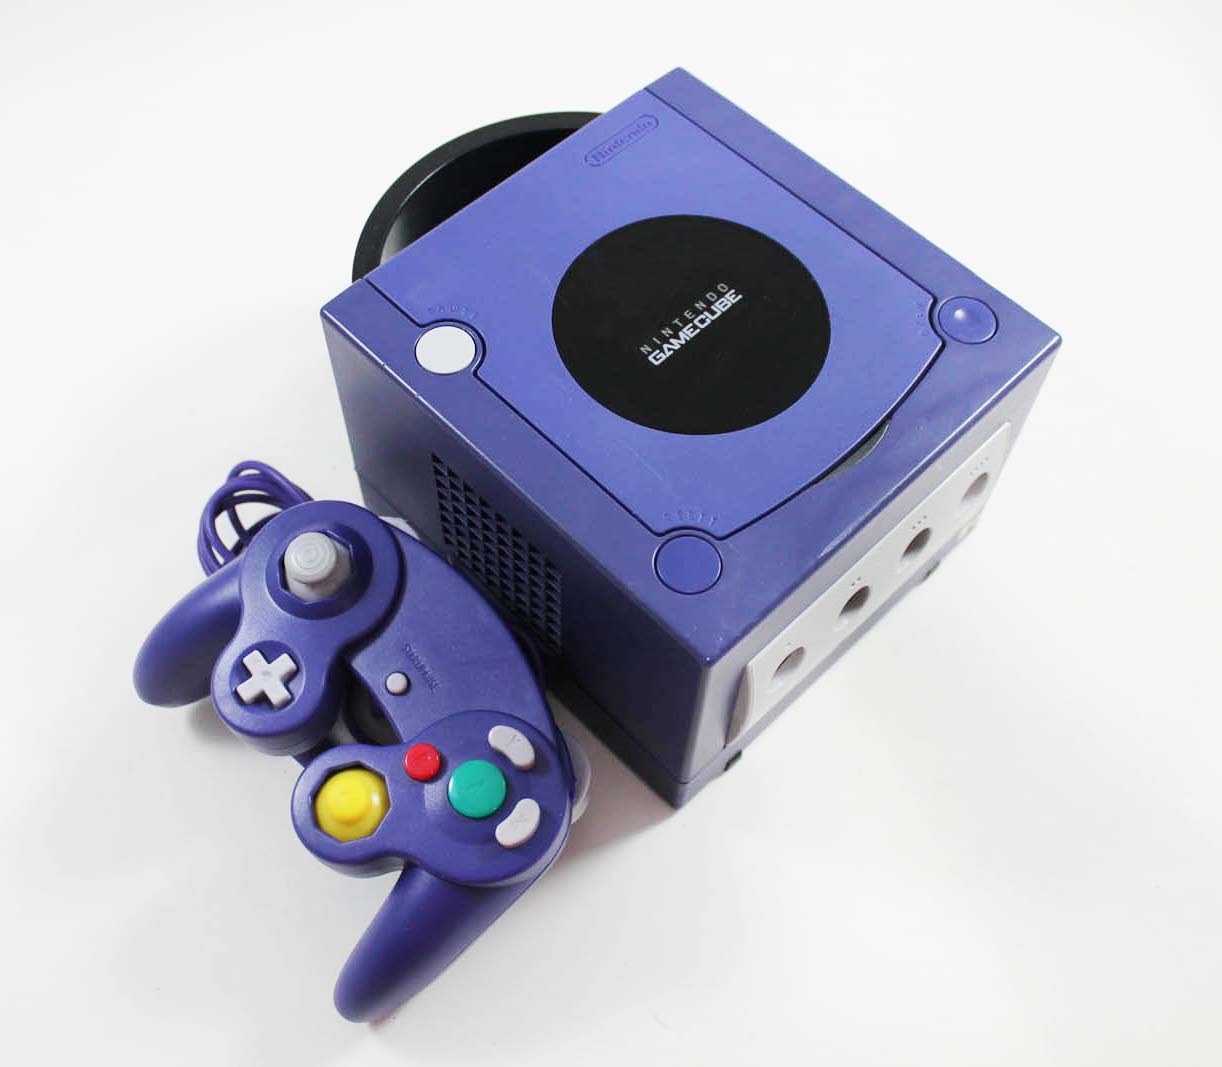 The Top 10 GameCube Games of All Time